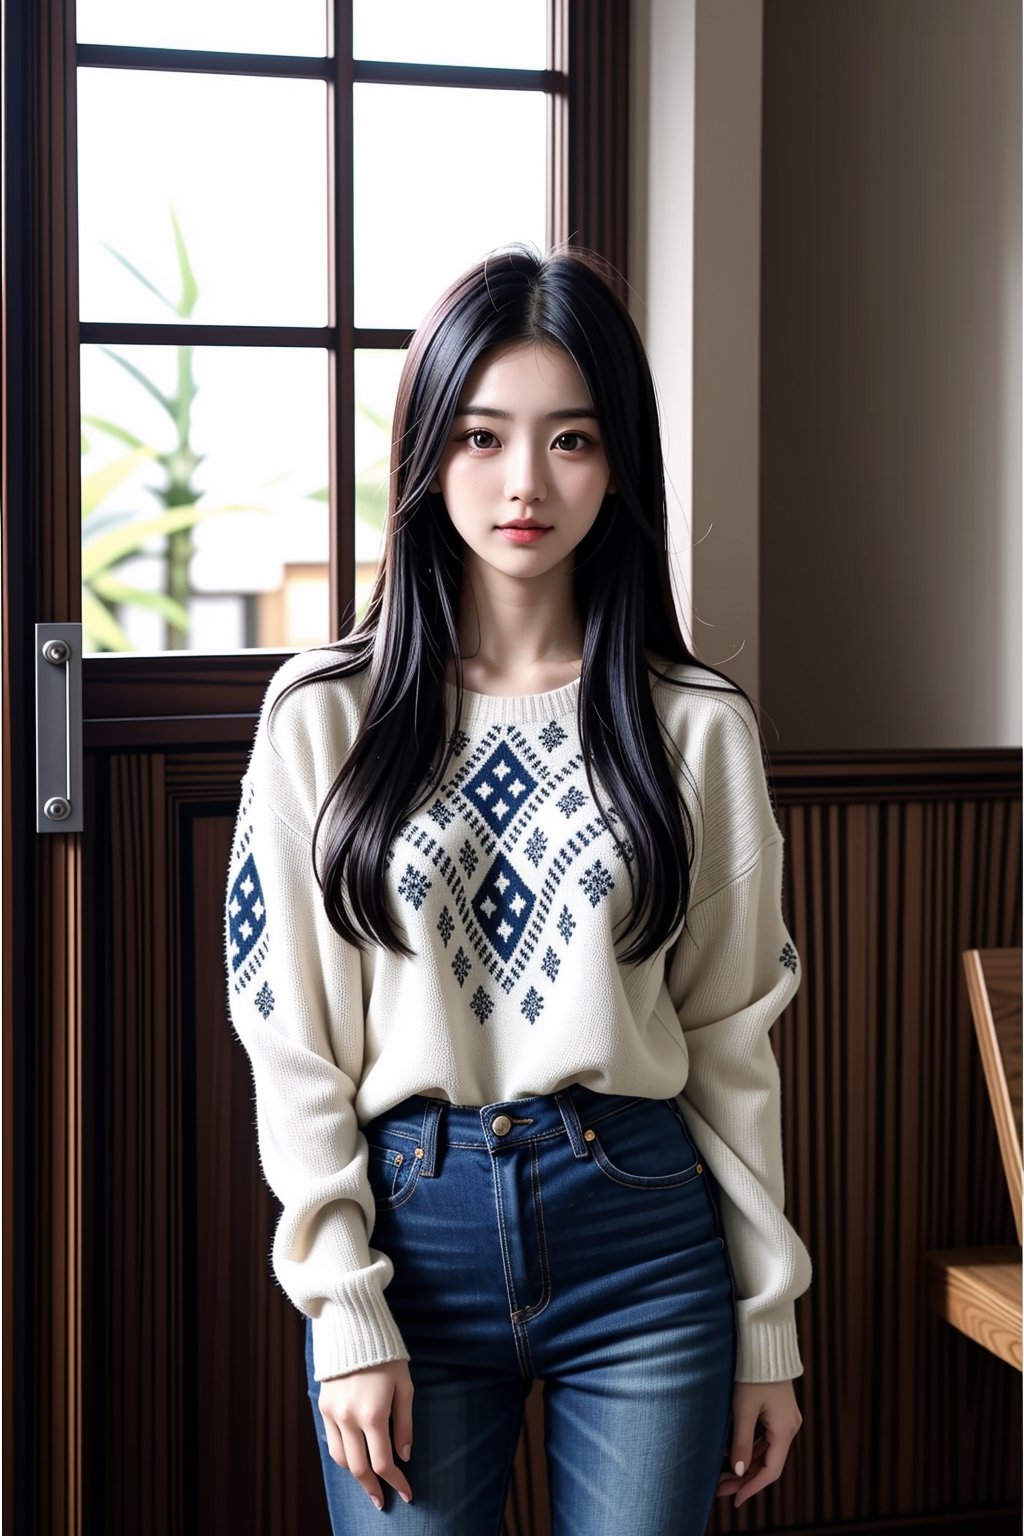 Lovely cute young attractive Japanes girl, 20 years old, cute, Instagram model, long black_hair, colorful hair,  They are wearing a white, patterned sweater and blue jeans. The background is bright, with sunlight streaming in through windows or open doors,<lora:659111690174031528:1.0>